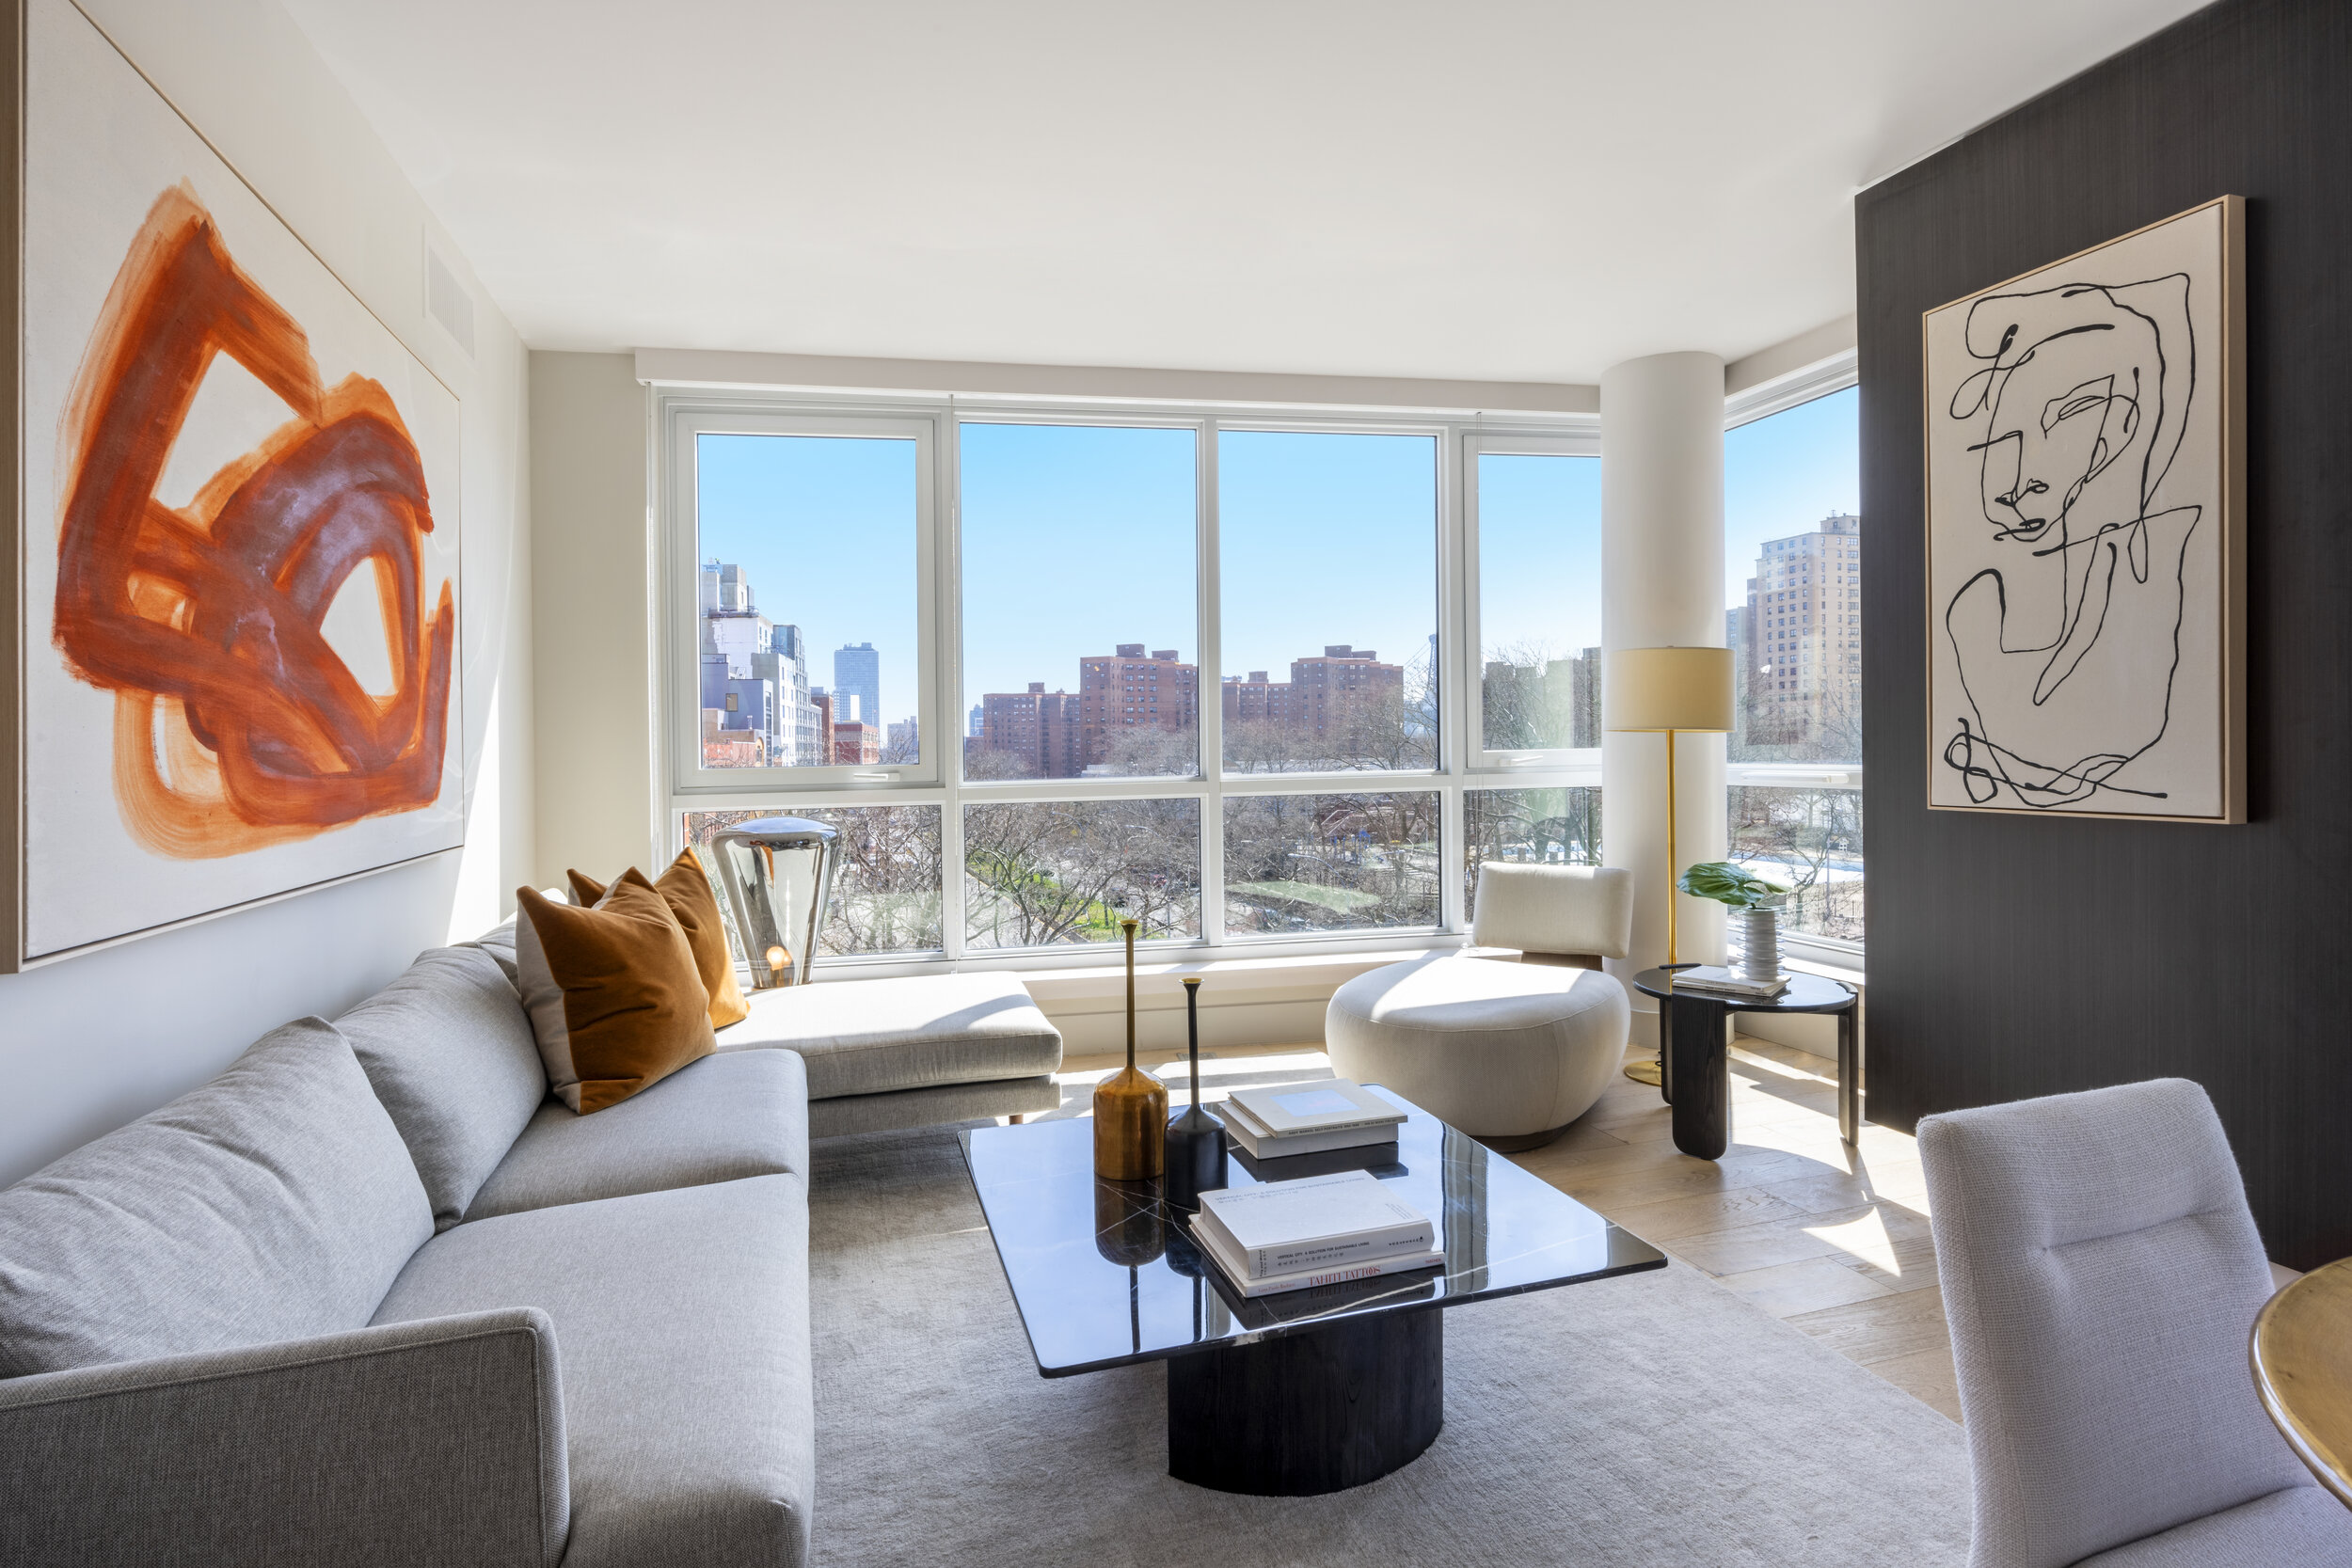  Situated on Houston Street, where East 2nd&nbsp;Street meets Avenue C, STELLA LES is near multiple subway lines at the Second Avenue and Delancey Street stations.&nbsp; With proximity to public transit and a Citi Bike docking station on the corner, 